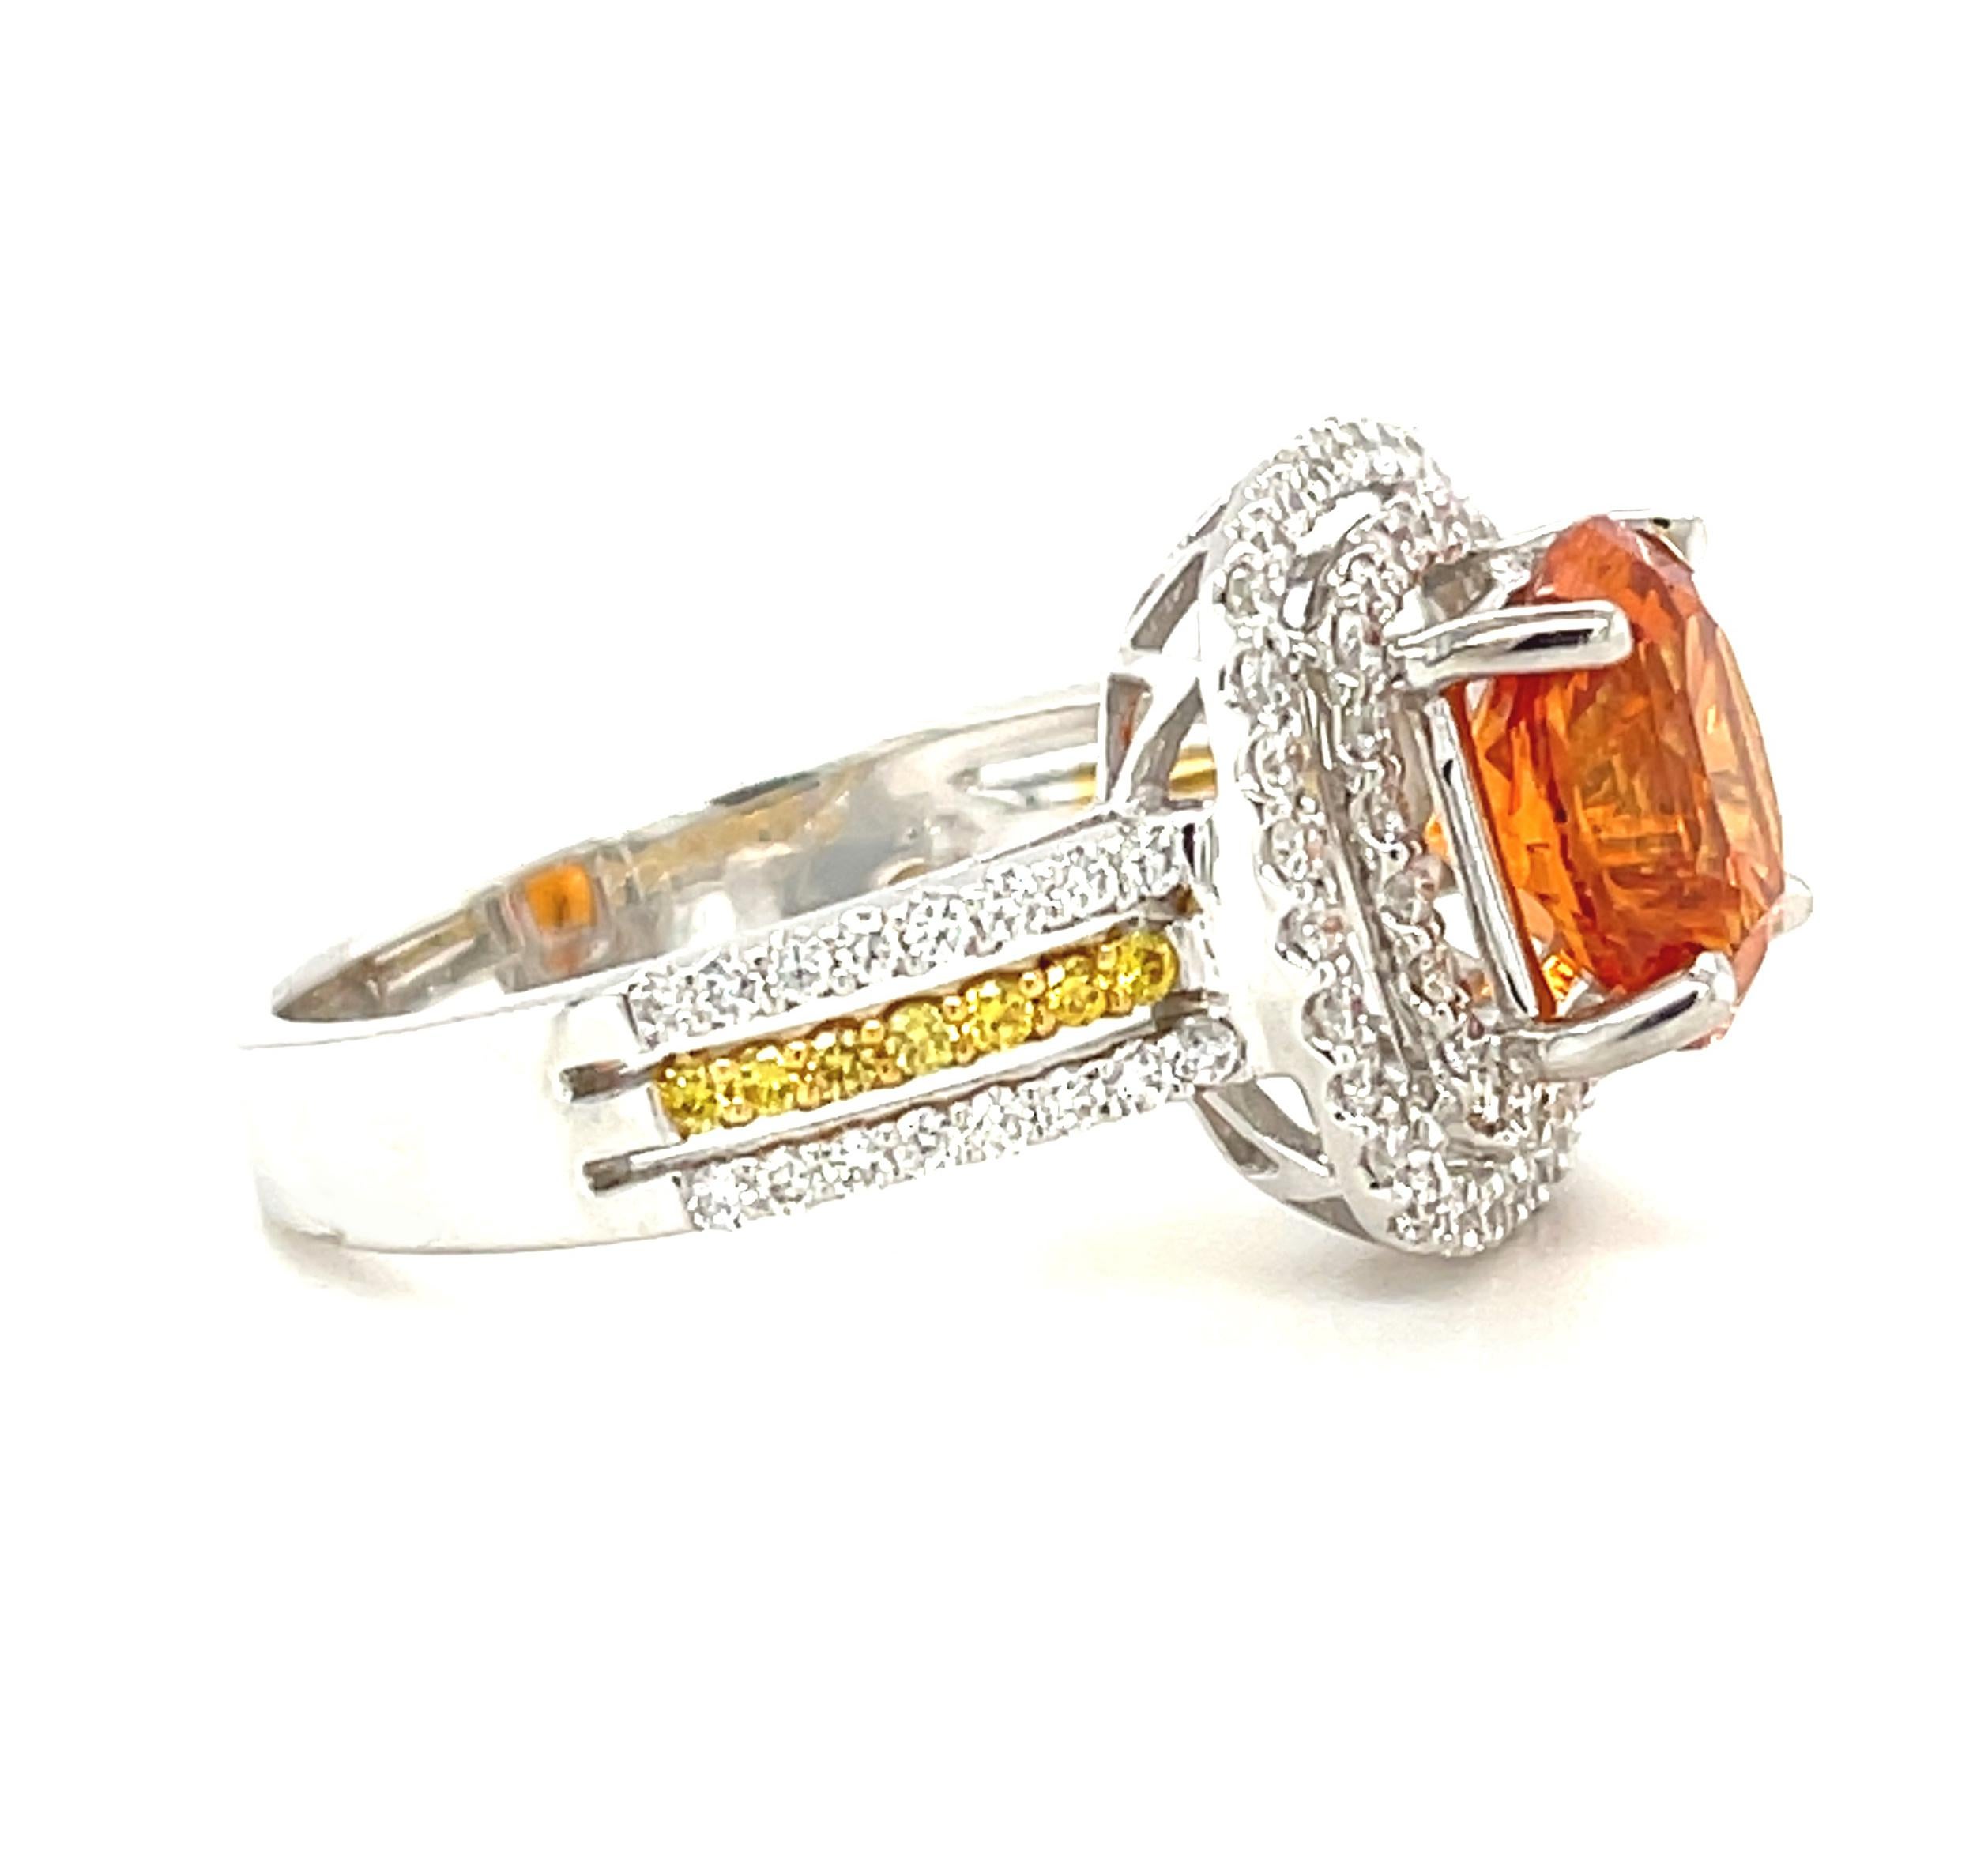 Mandarin Spessartite Garnet and Diamond Cocktail Ring in 18k Gold, 2.99 Carats In New Condition For Sale In Los Angeles, CA